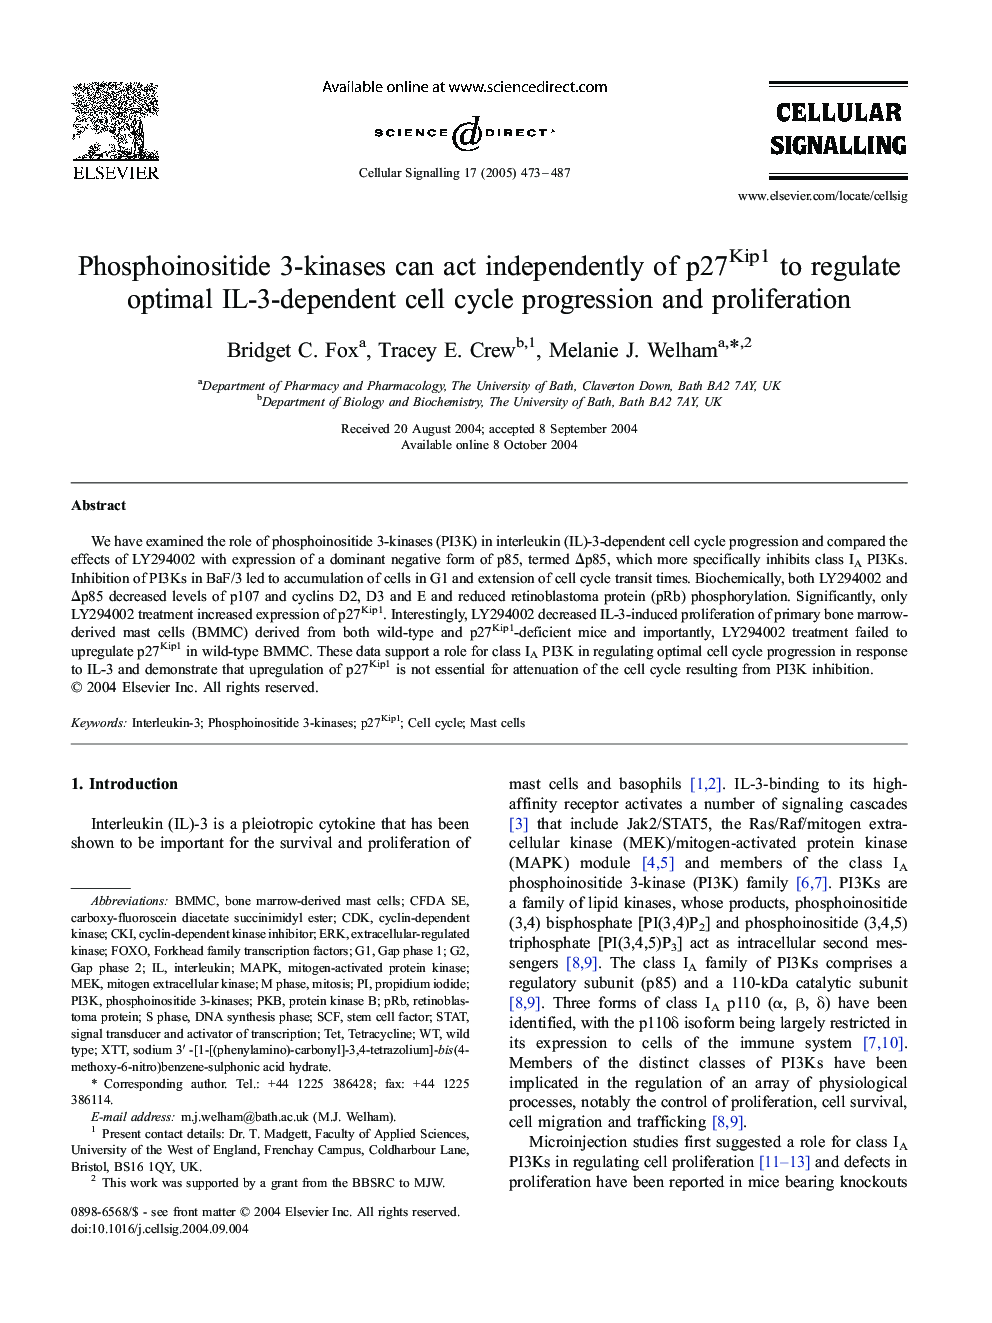 Phosphoinositide 3-kinases can act independently of p27Kip1 to regulate optimal IL-3-dependent cell cycle progression and proliferation